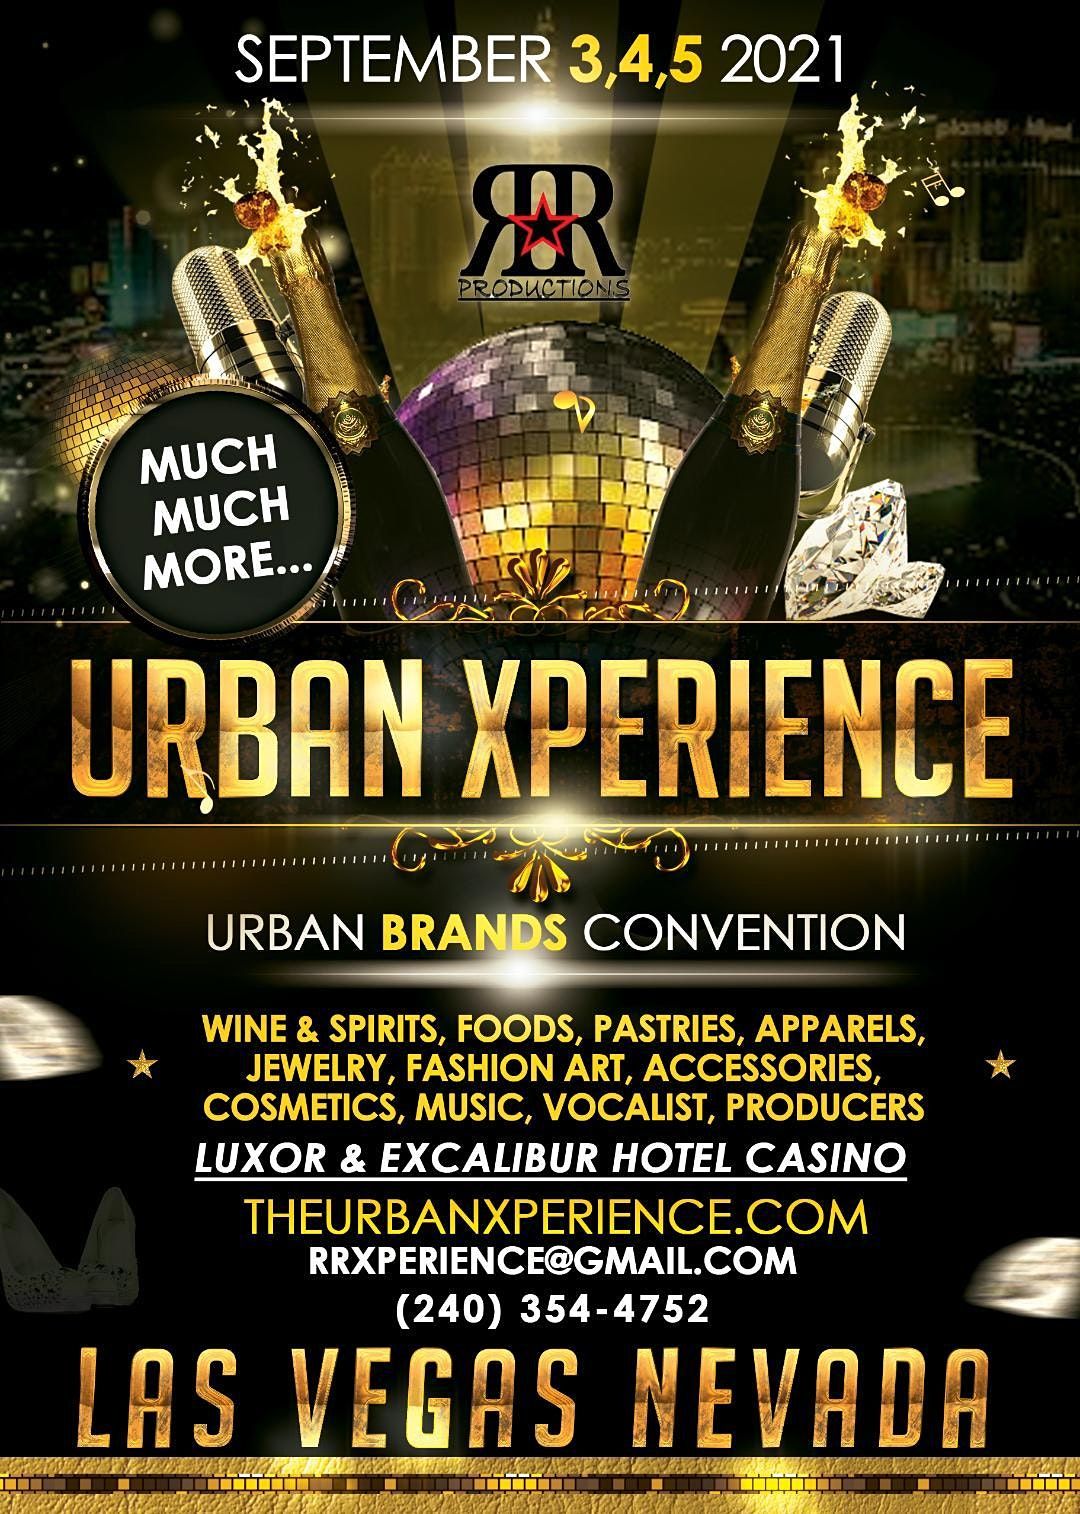 THE URBAN XPERIENCE CONVENTION VIP